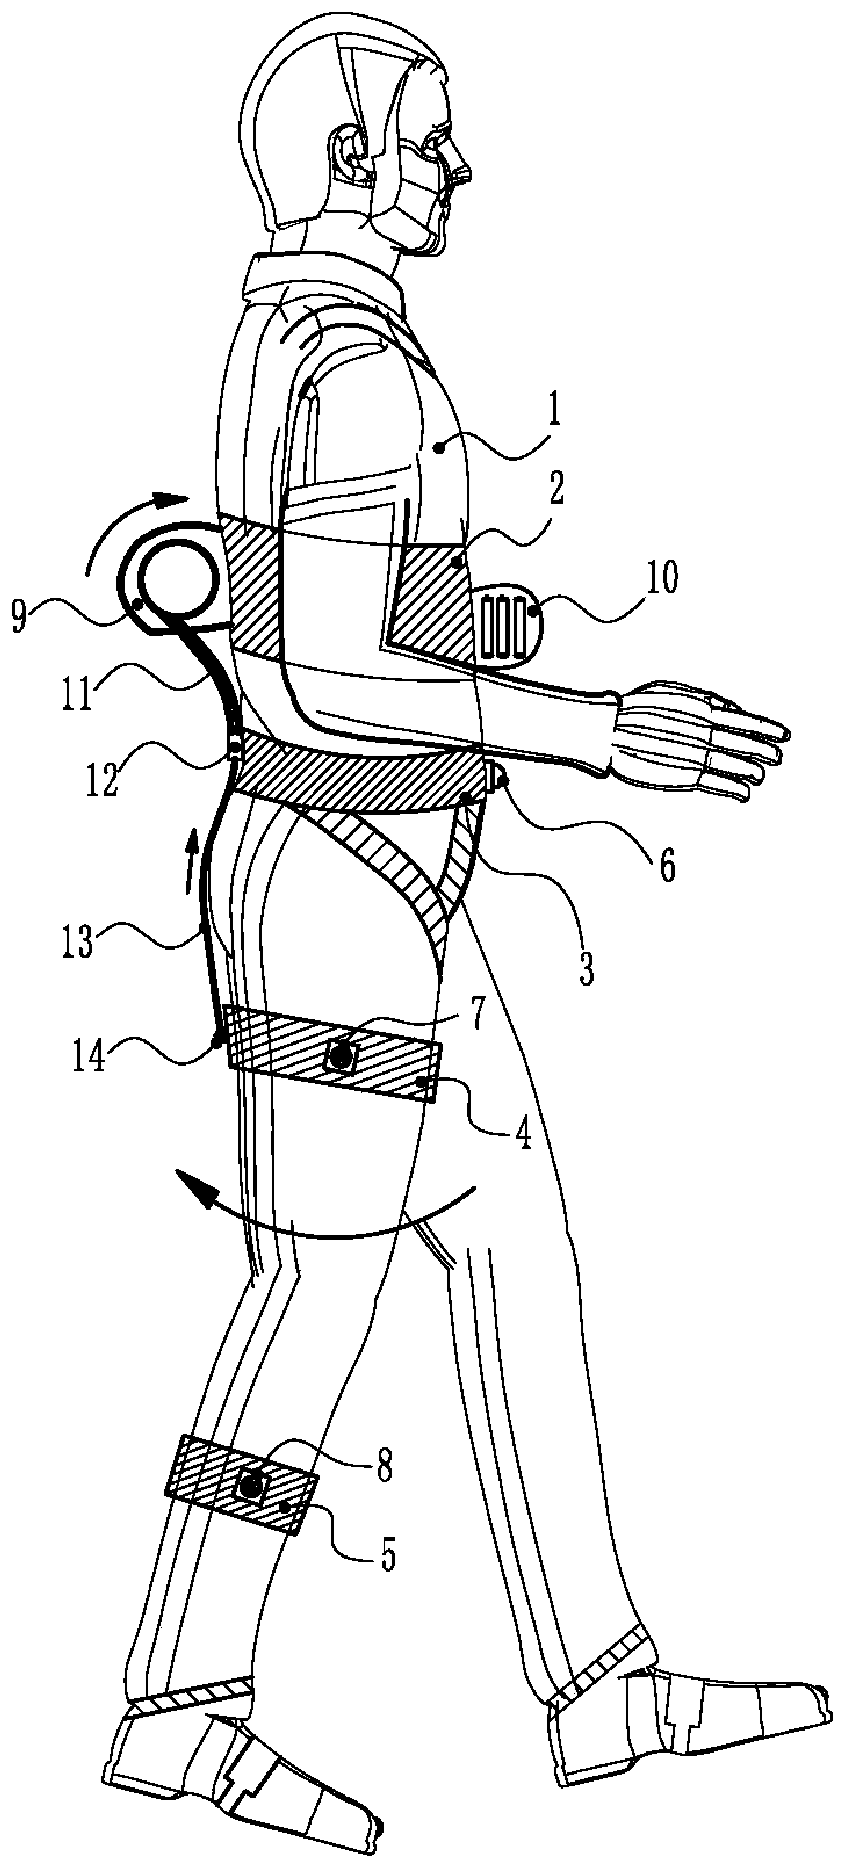 Flexible functional outwear body for assisting lower limbs